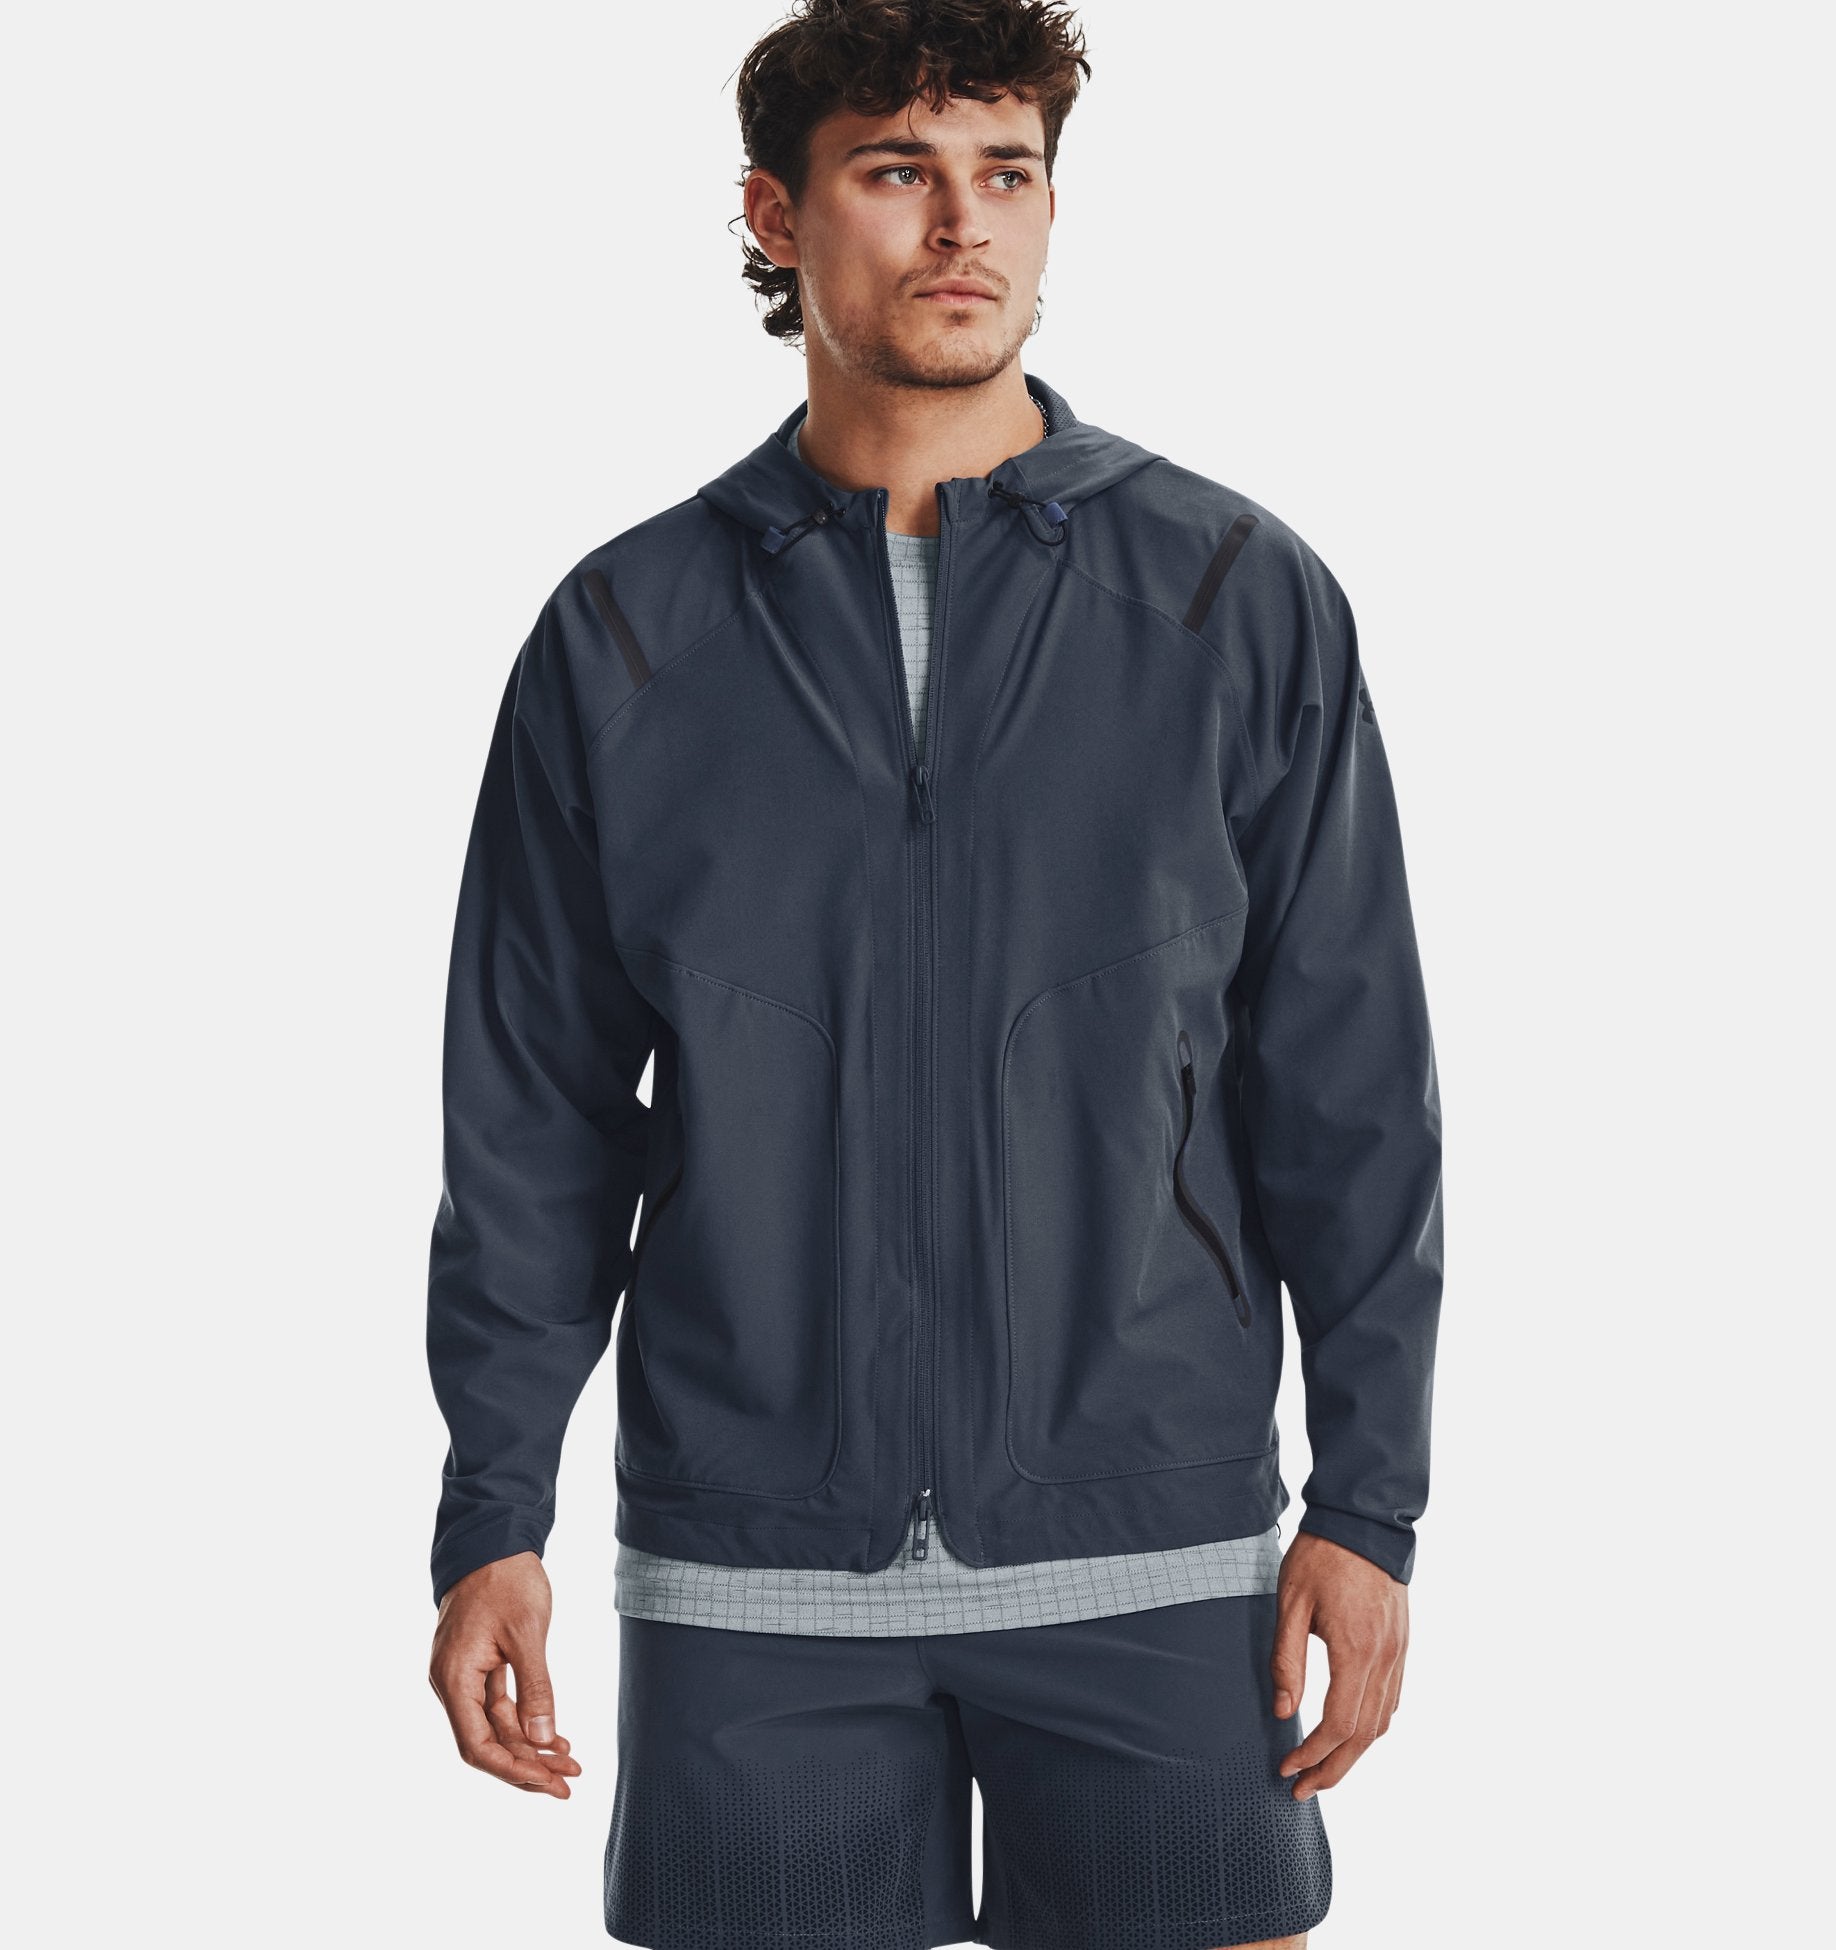 Under Armor Unstoppable Track Jacket - Gray